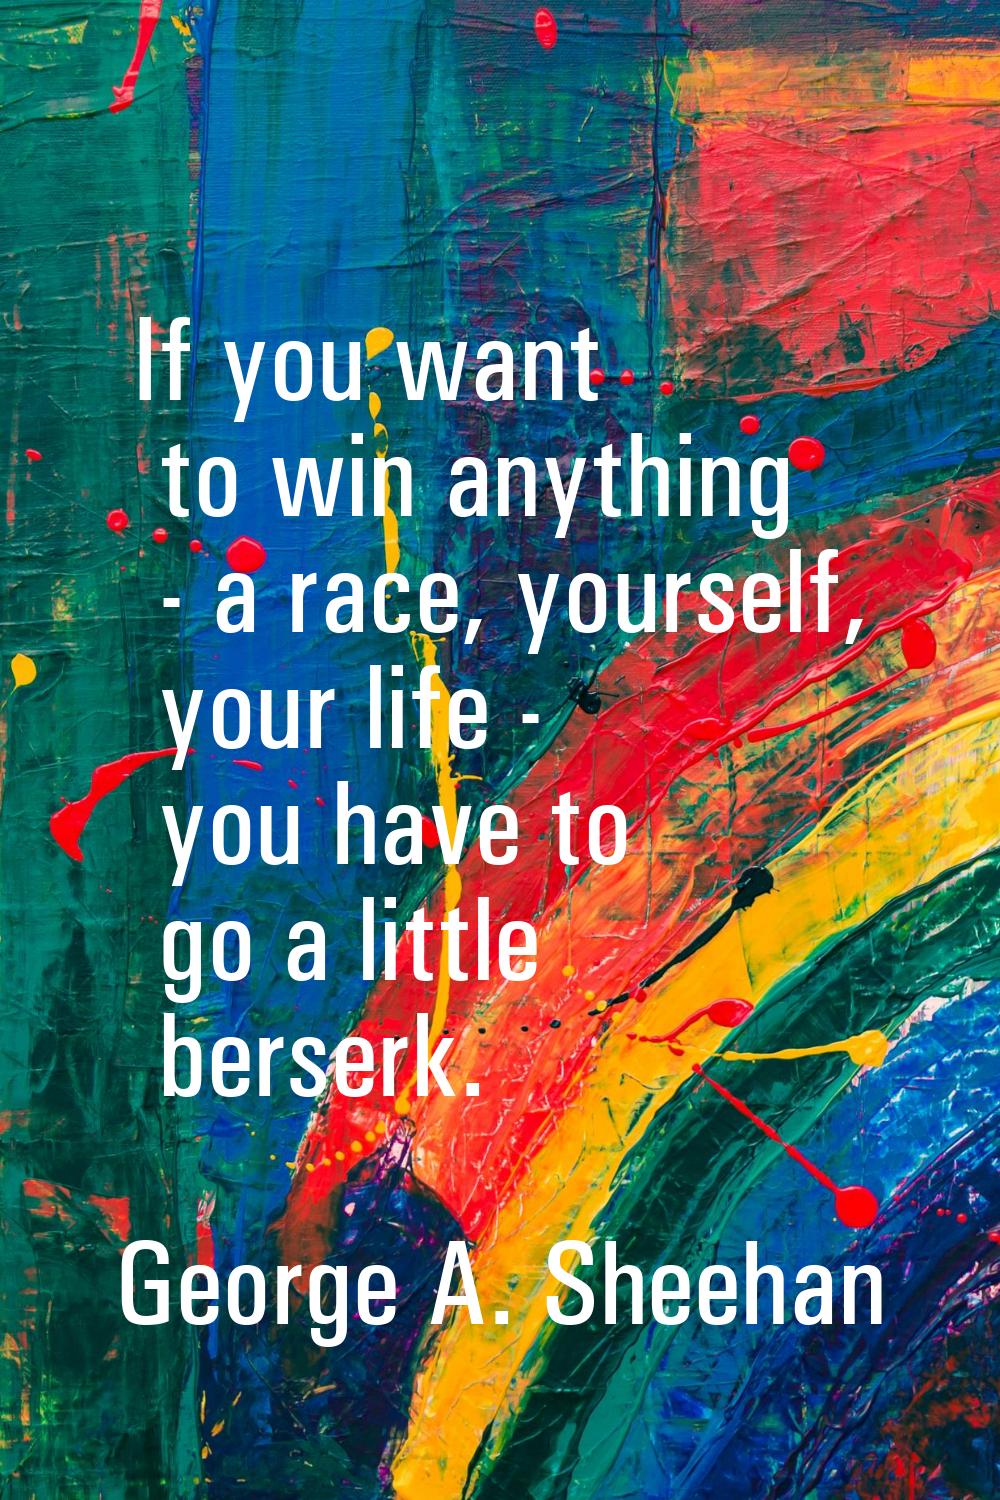 If you want to win anything - a race, yourself, your life - you have to go a little berserk.